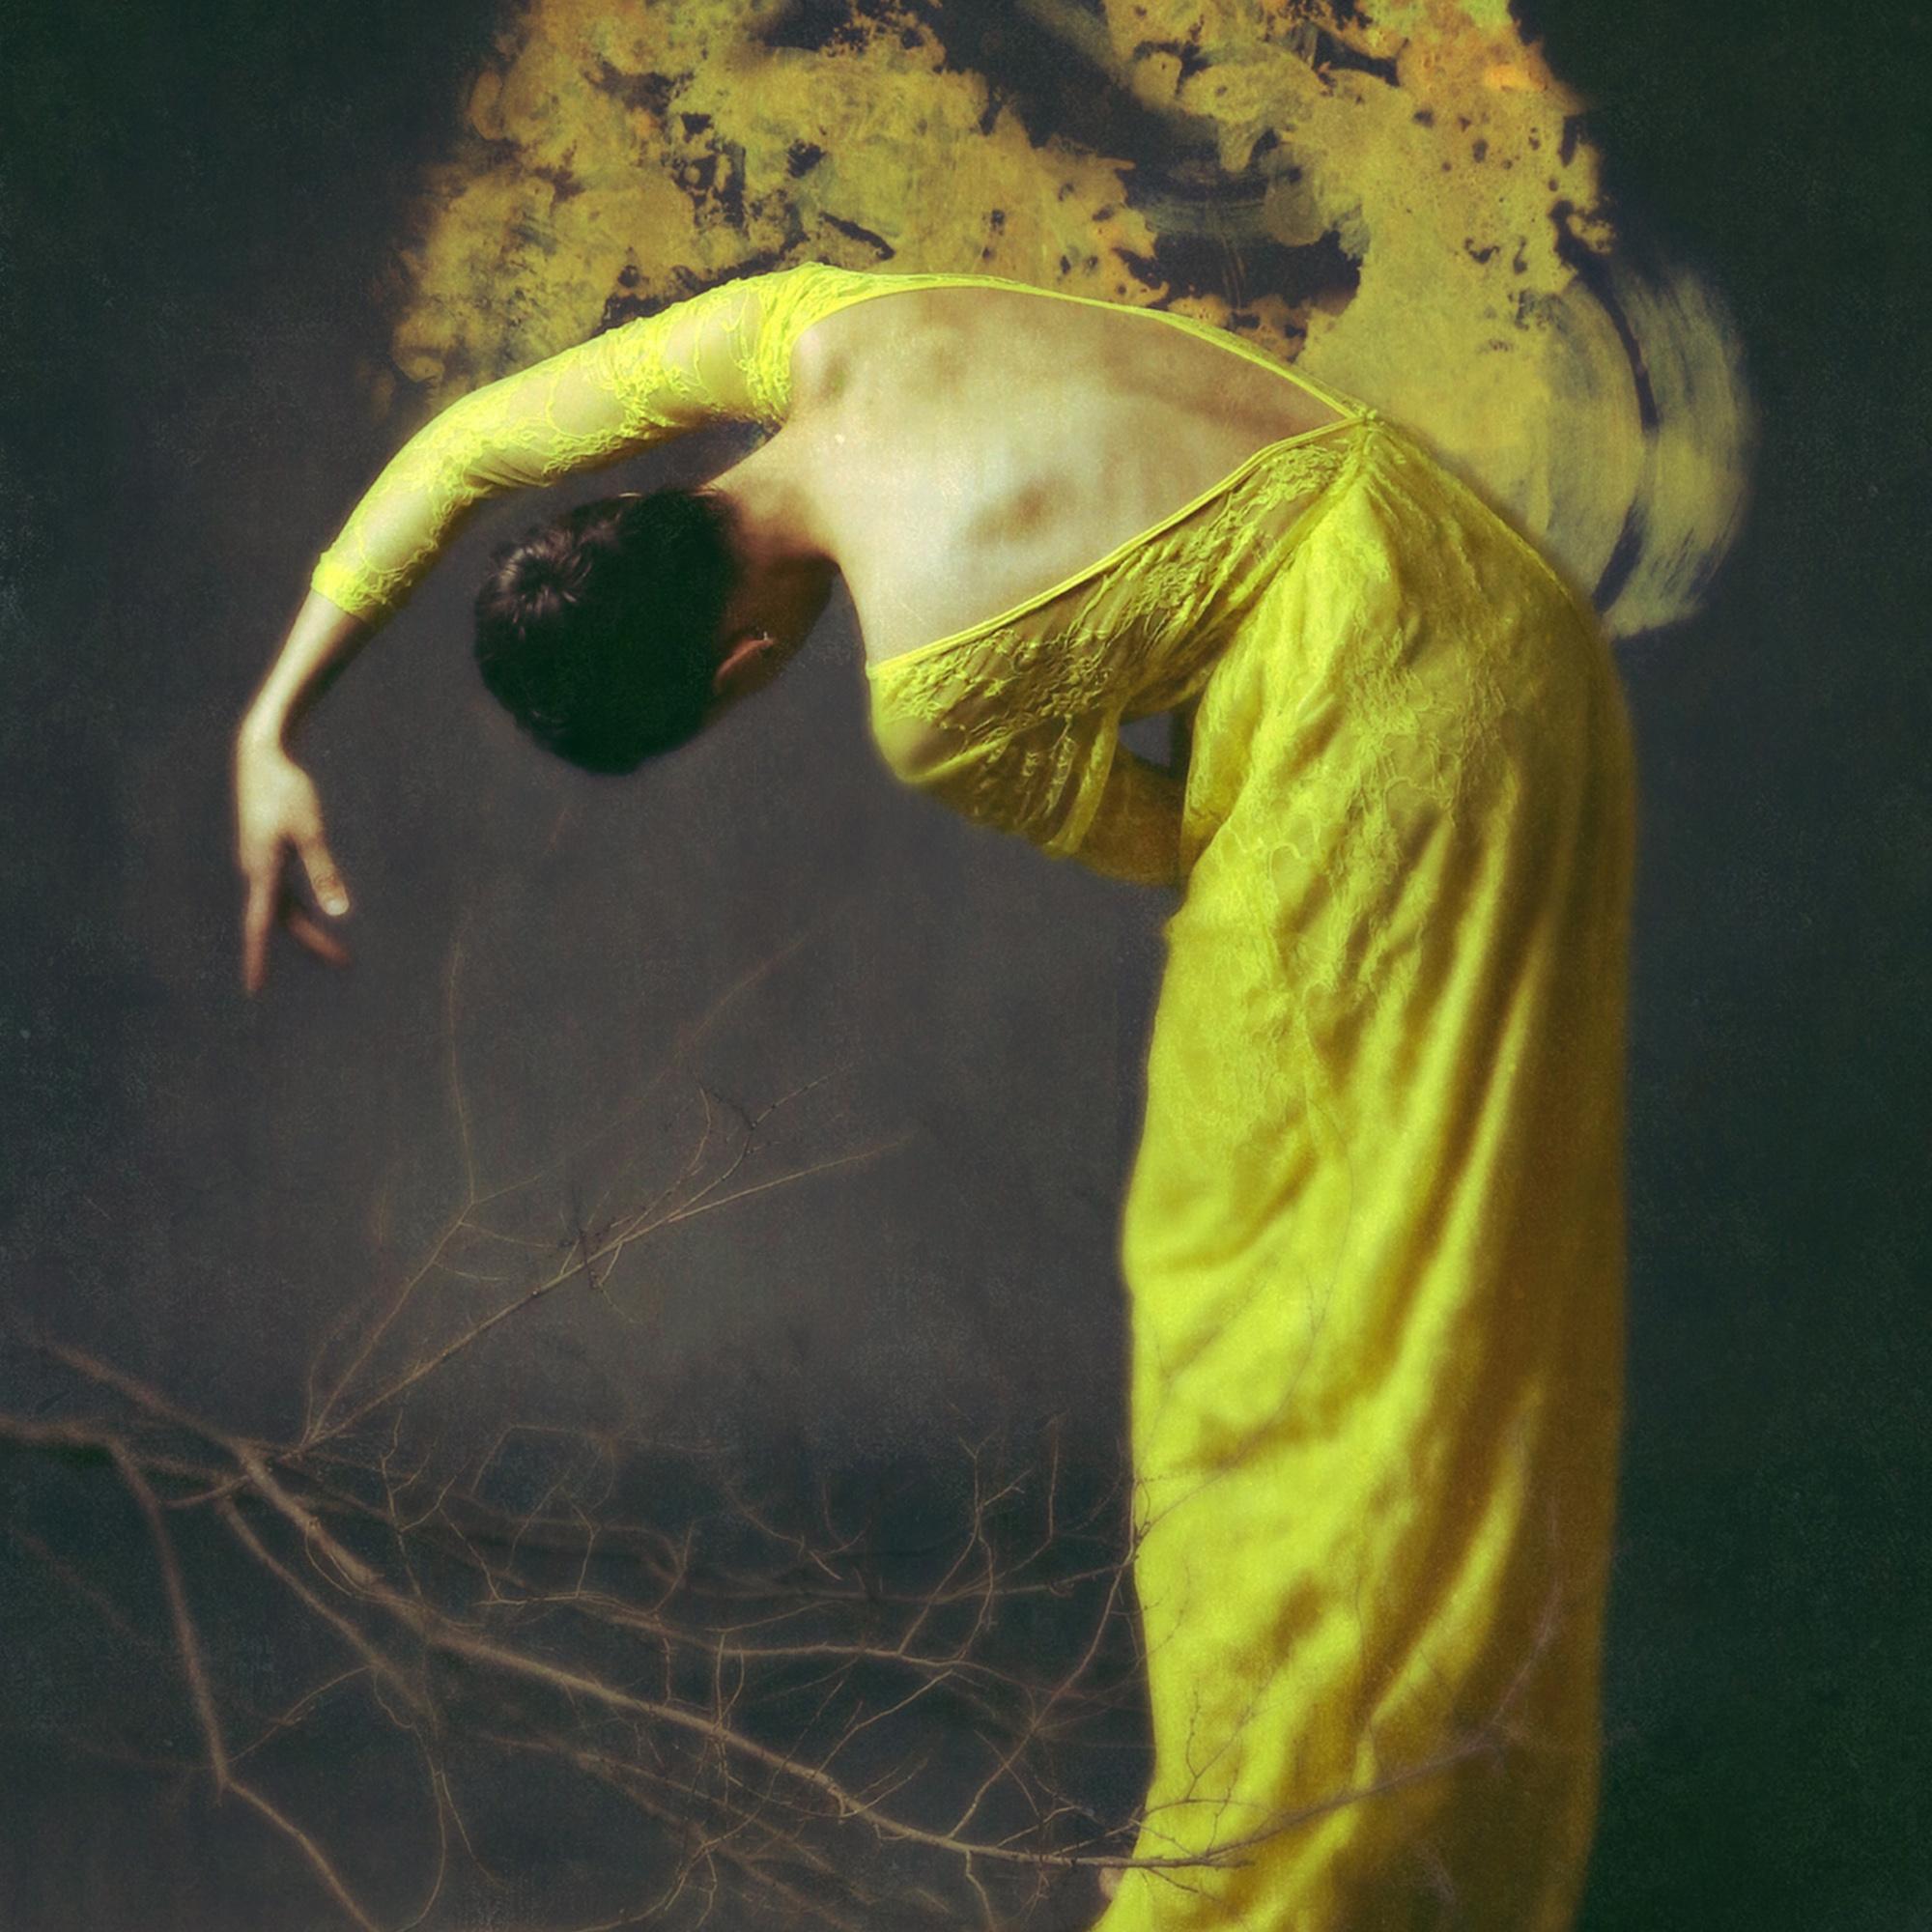 Desolate Amber by Jo Cardin - Contemporary Fashion photography portrait - Photograph by Josephine Cardin